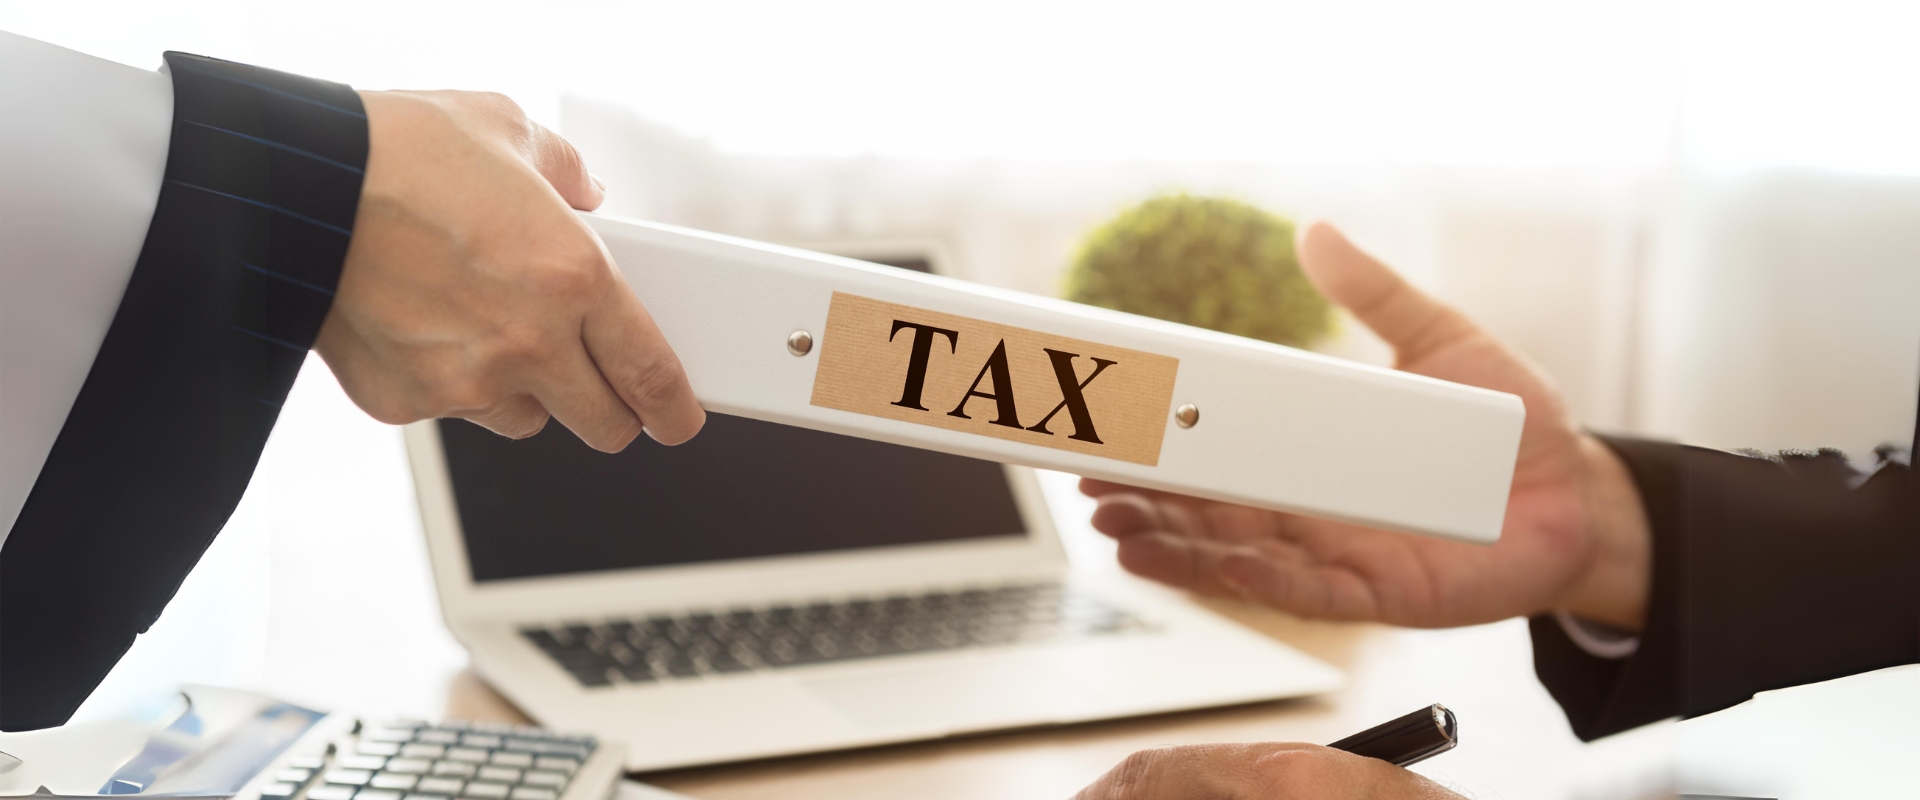 Let's Understand The Significance of The Tax Deposit Code and Its Use